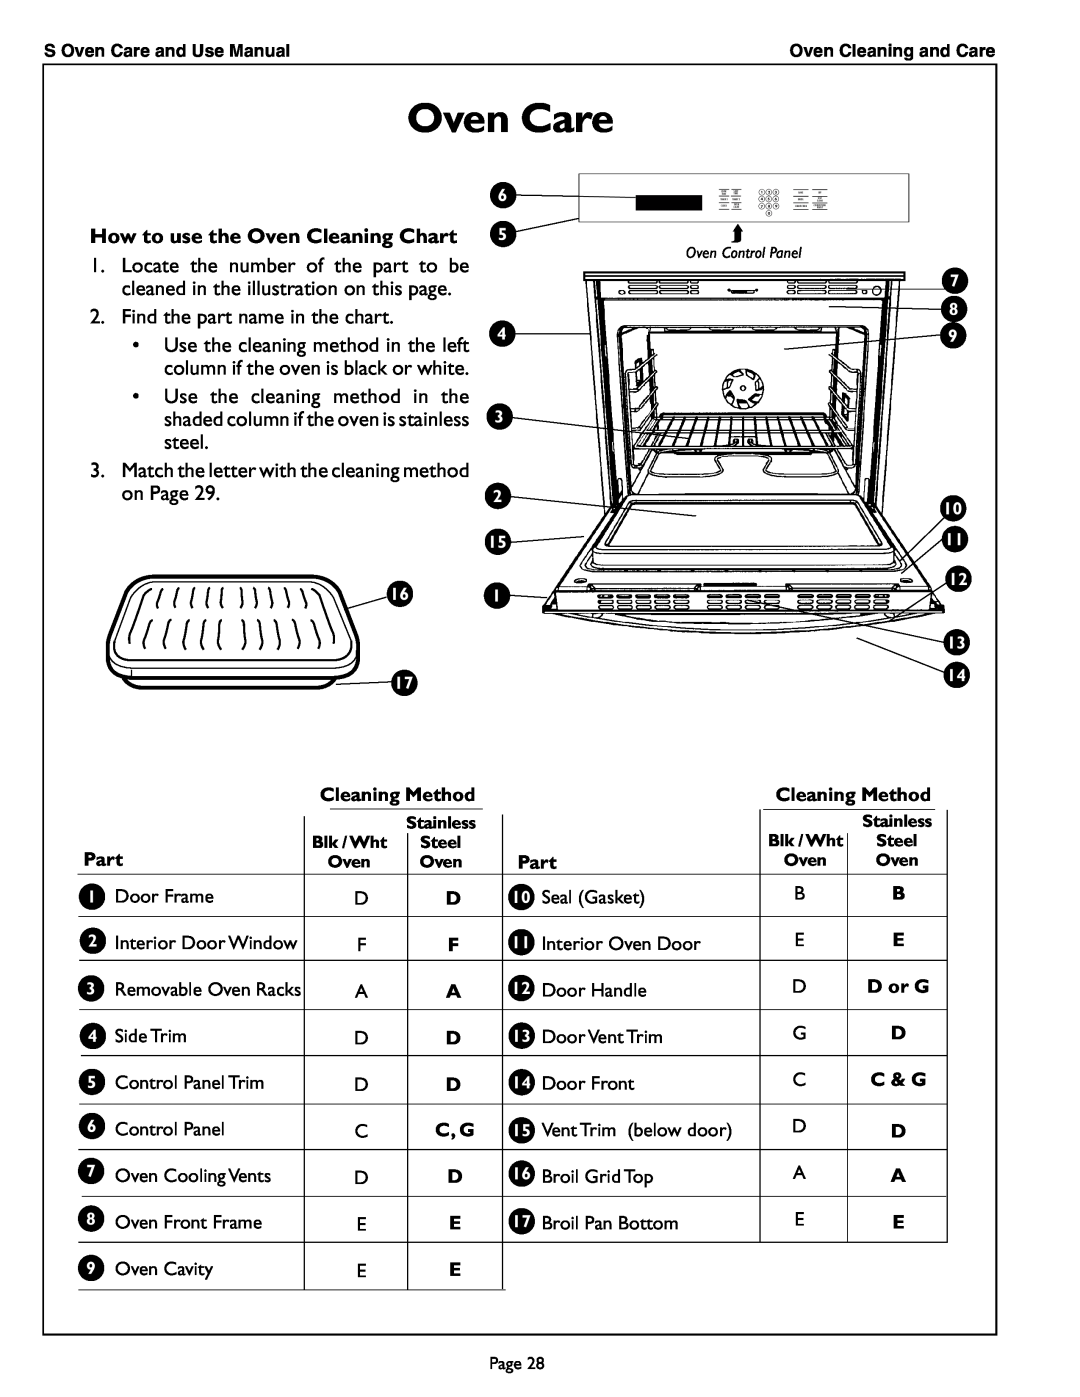 Thermador SCD302 manual Oven Care, How to use the Oven Cleaning Chart, Cleaning Method, Part, D or G, C & G 